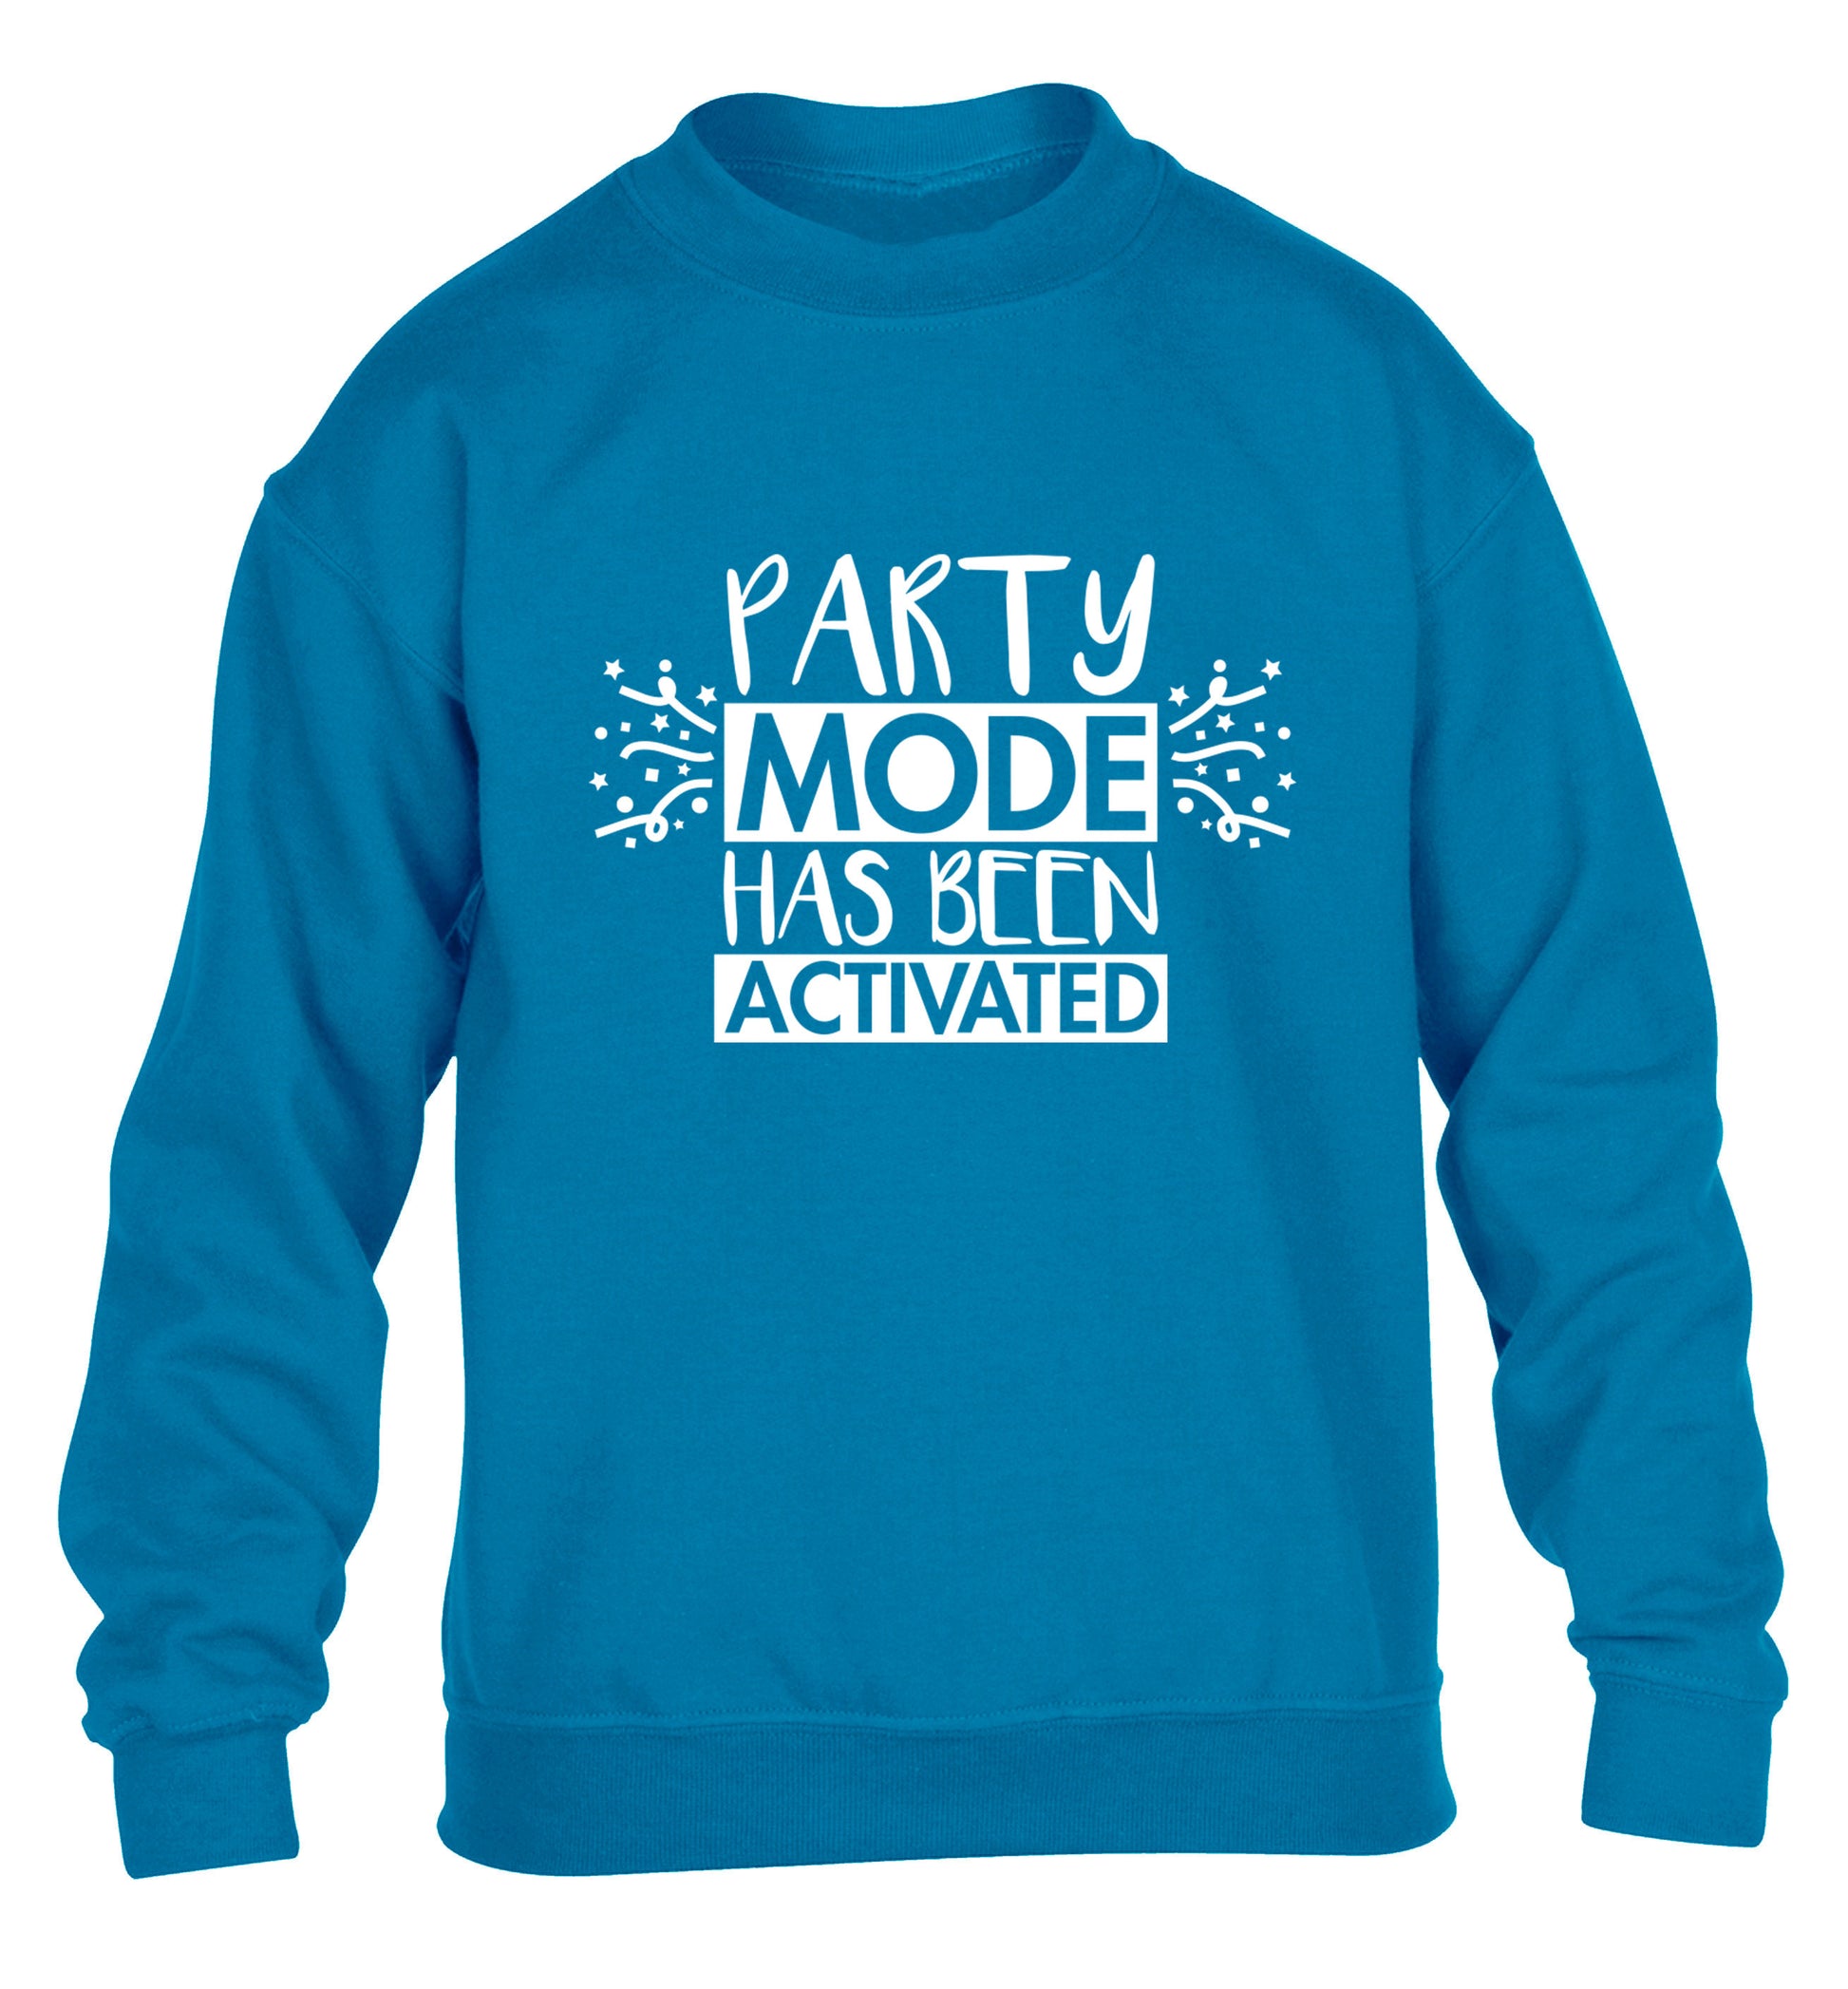 Please do not disturb party mode has been activated children's blue sweater 12-14 Years